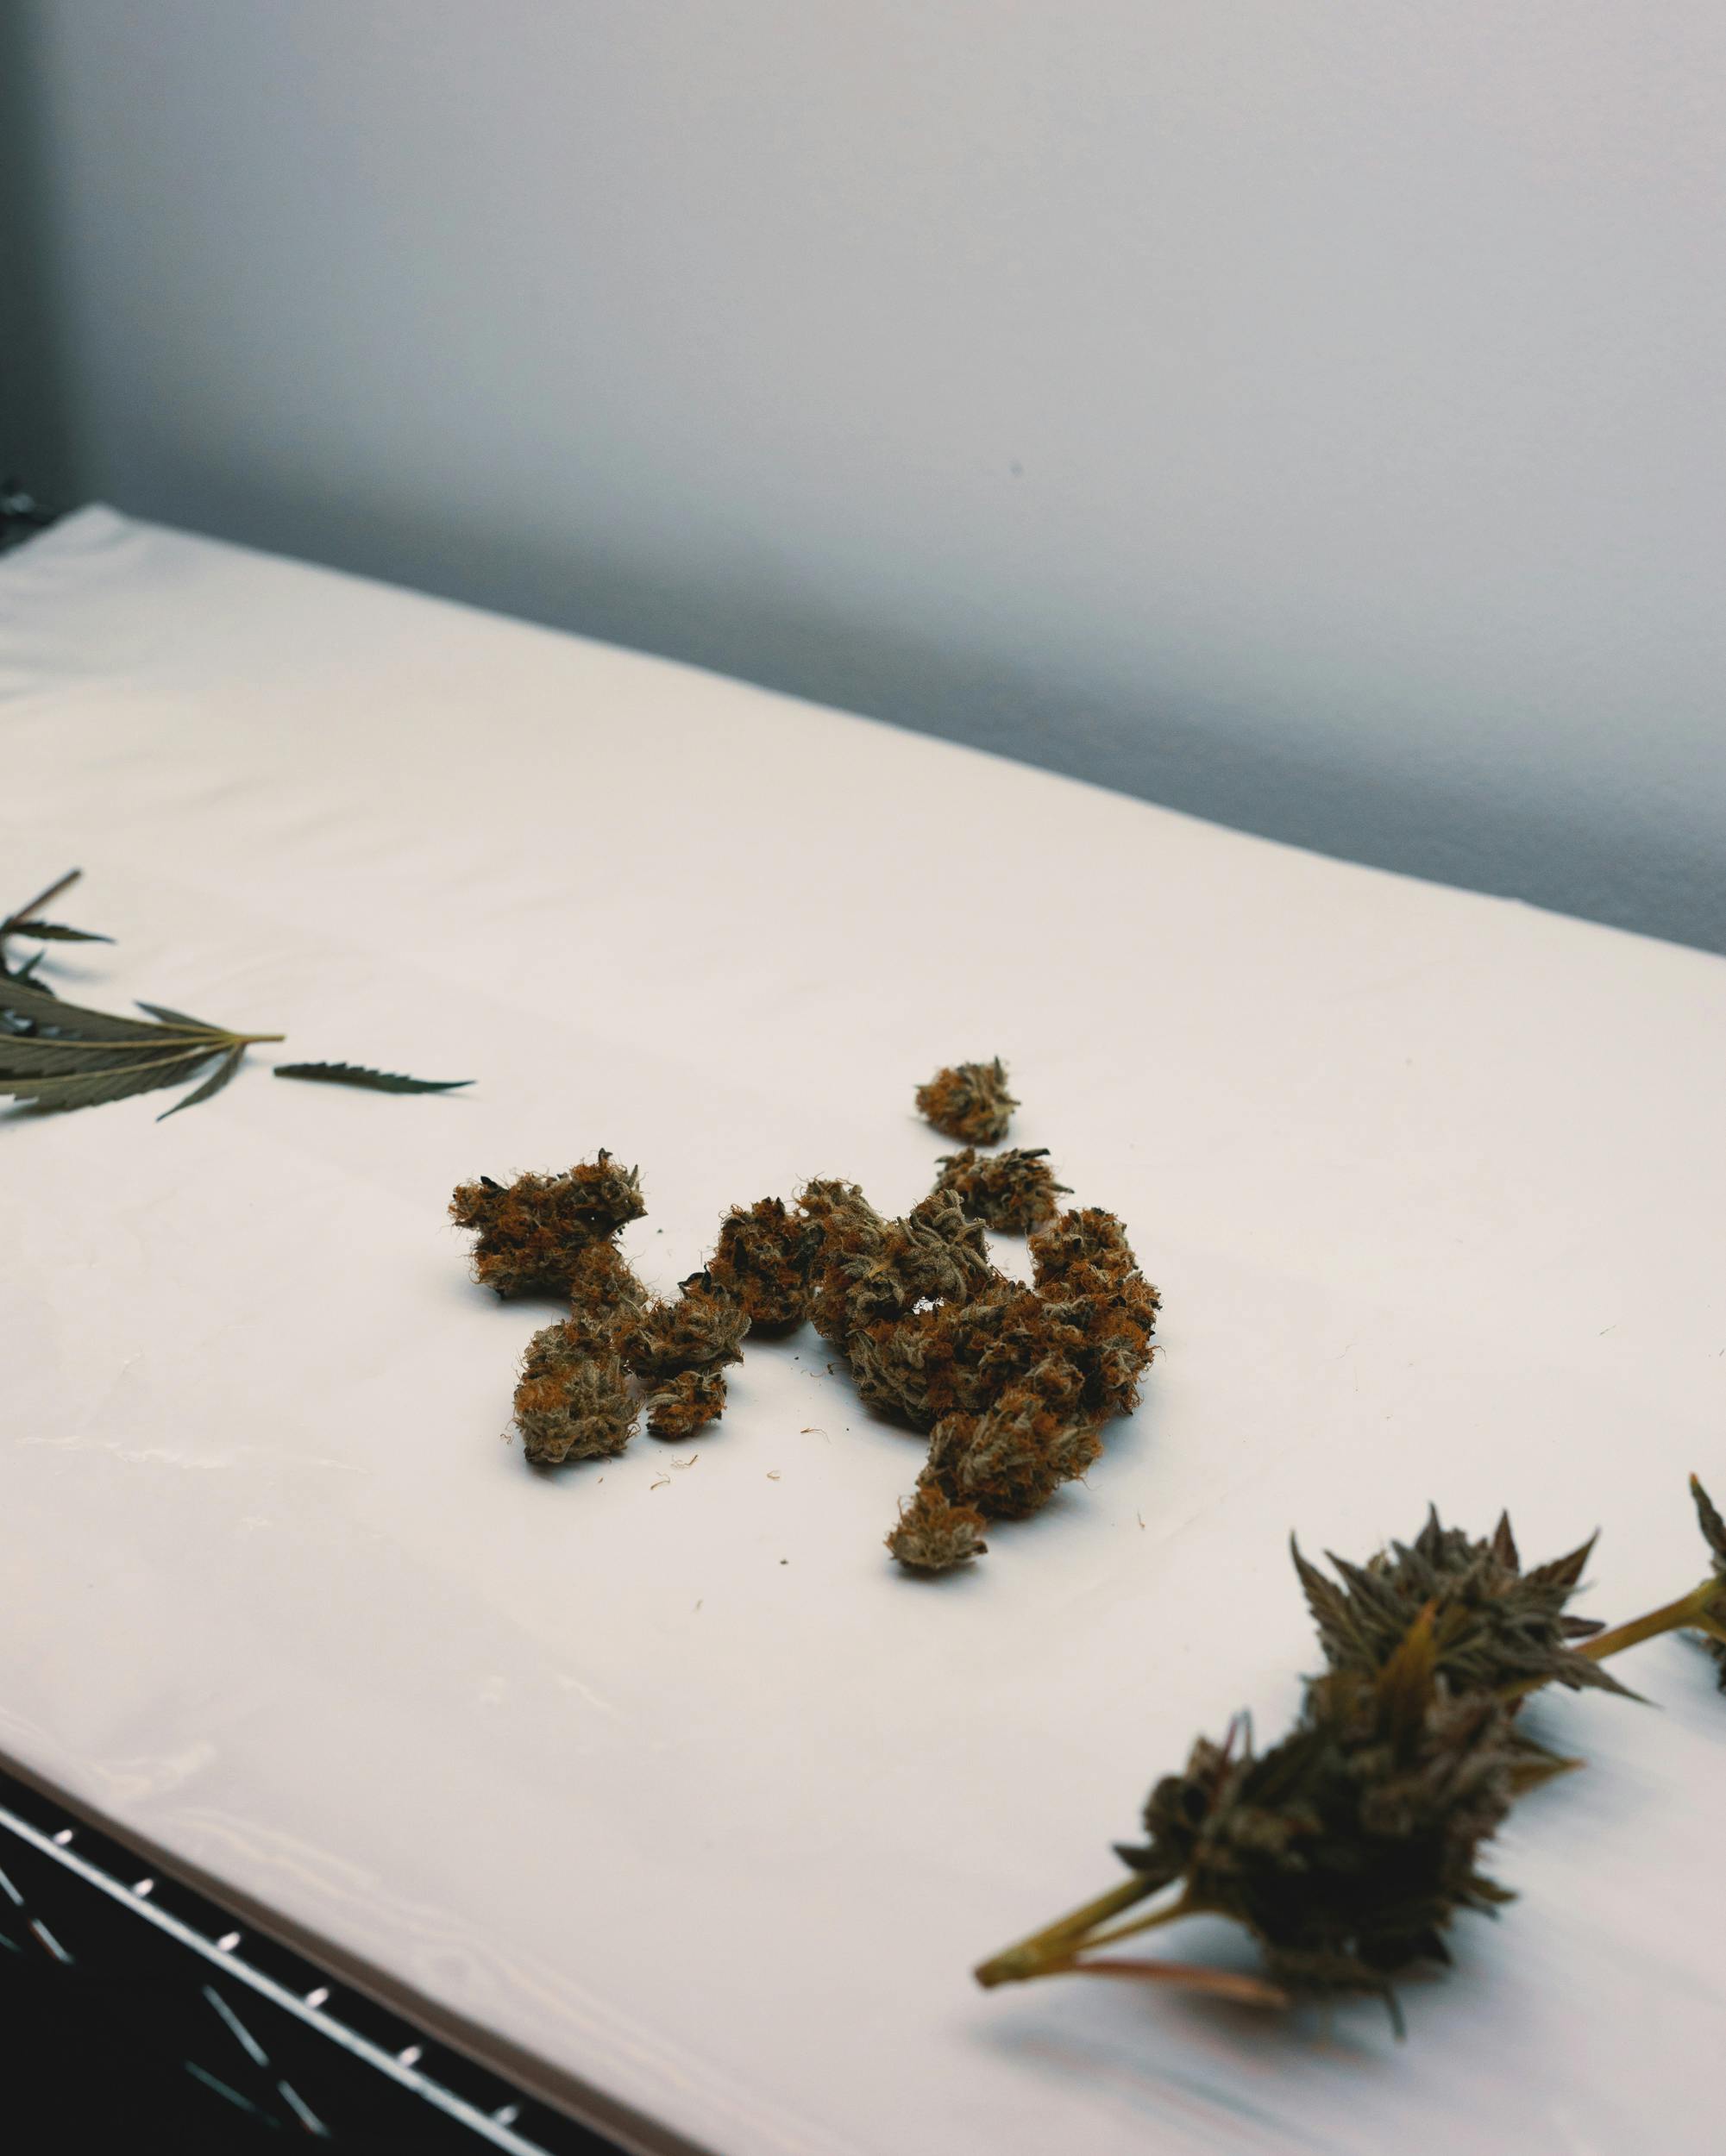 How to Dry Cannabis 7 Heres How to Dry Cannabis Like a Pro